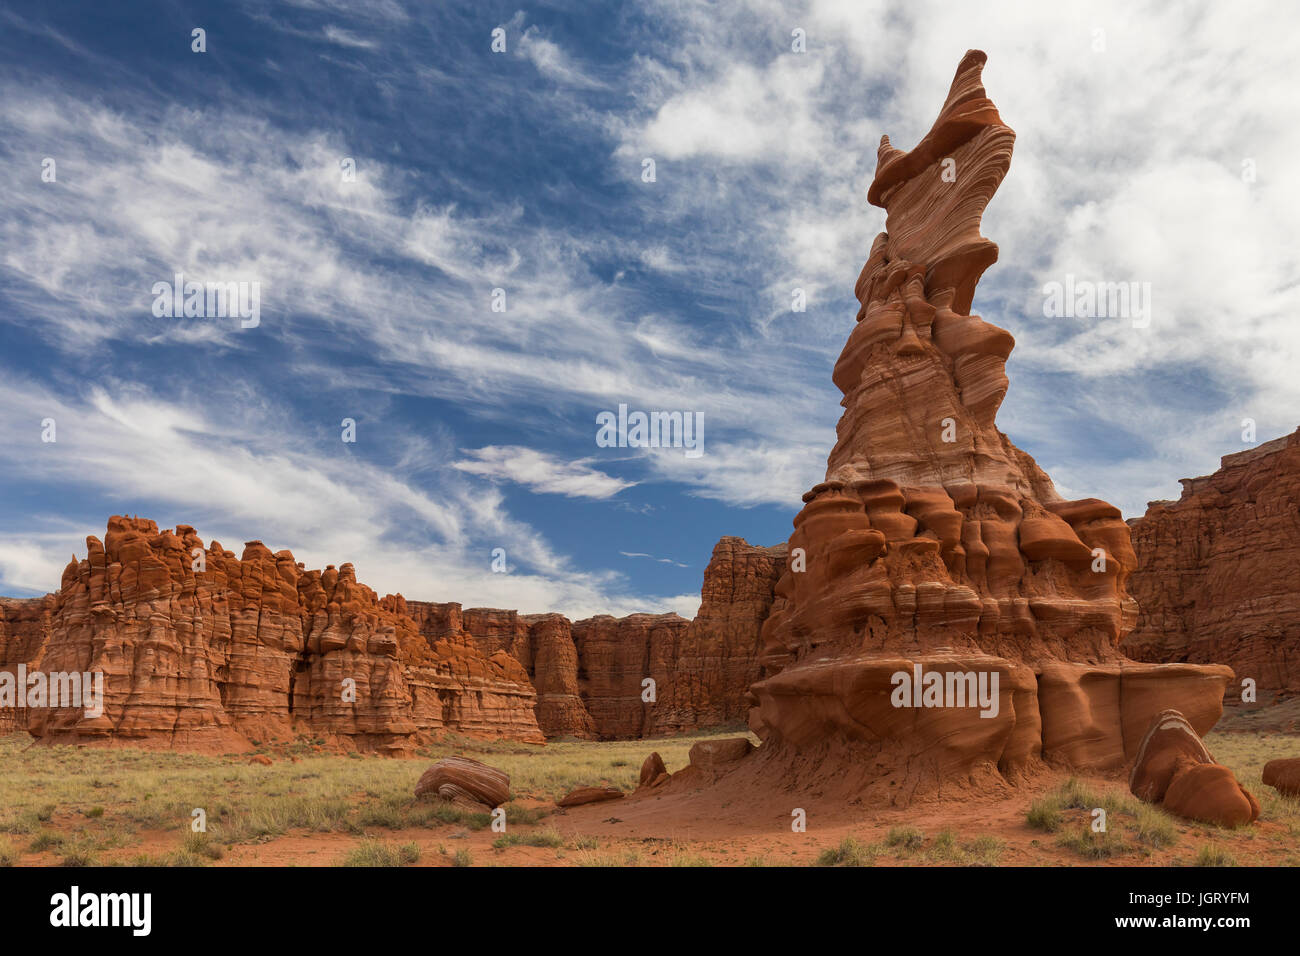 The Hopi Clown. Moenave sandstone, a relatively soft sandstone layer that lends itself well to being sculpted by erosion. Arizona, USA Stock Photo